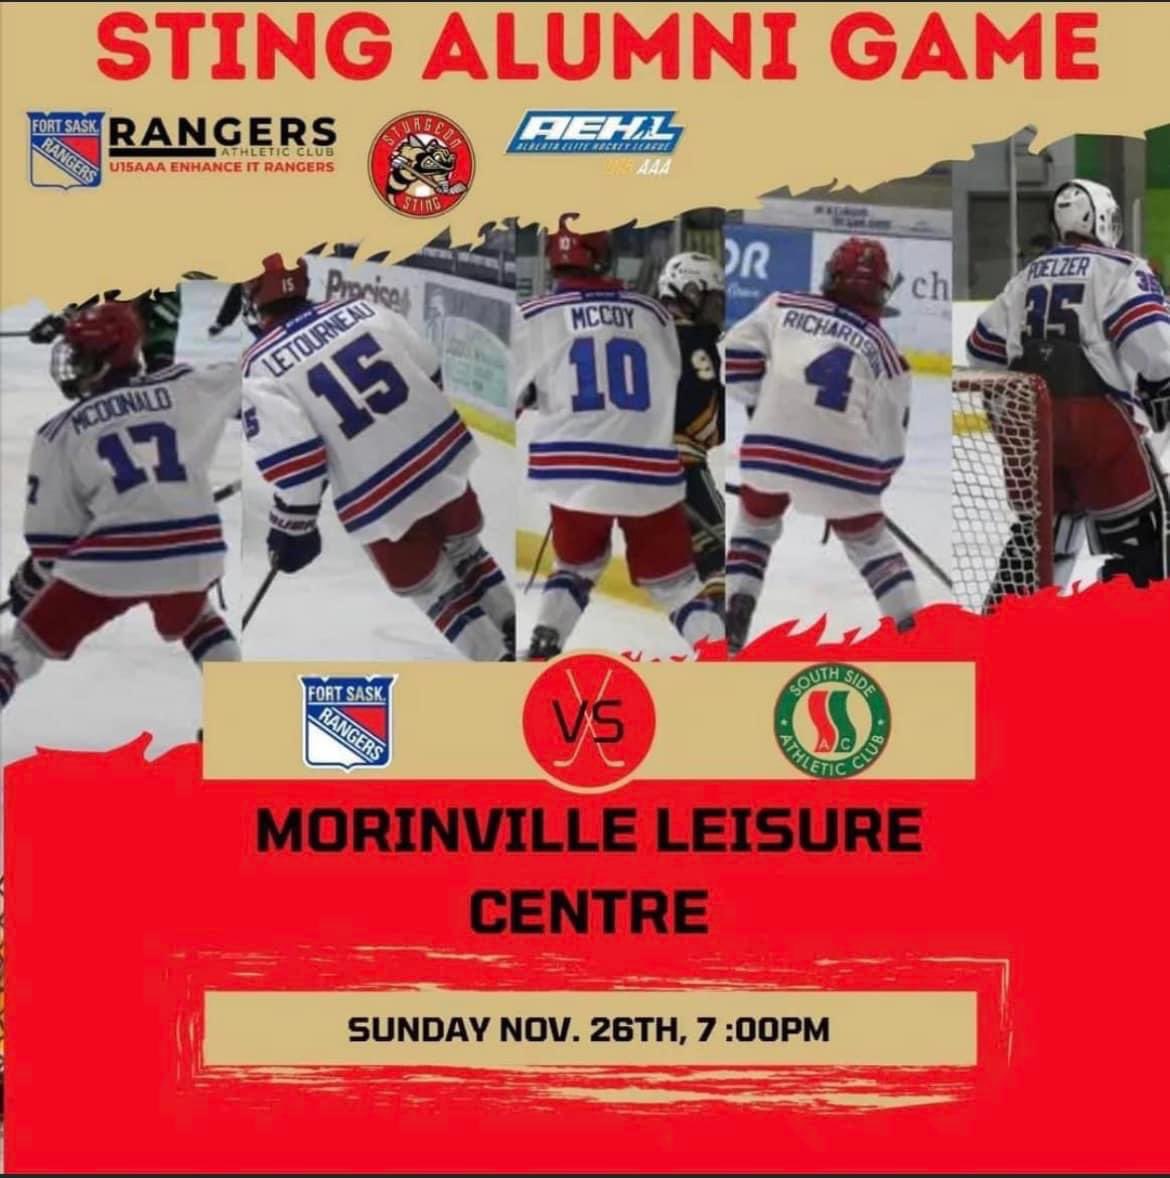 Let’s pack the hive tonight!🐝 

Come down to the MLC for a special home game to cheer our 5 Sting alumni @RAC_U15_AAA as they take on SSAC @ 7pm! 🏒 ♥️💙🤍

🚨SILENT AUCTION & 50/50 🚨
#sturgeonproud #stingalumni #hardwork #u15aaa